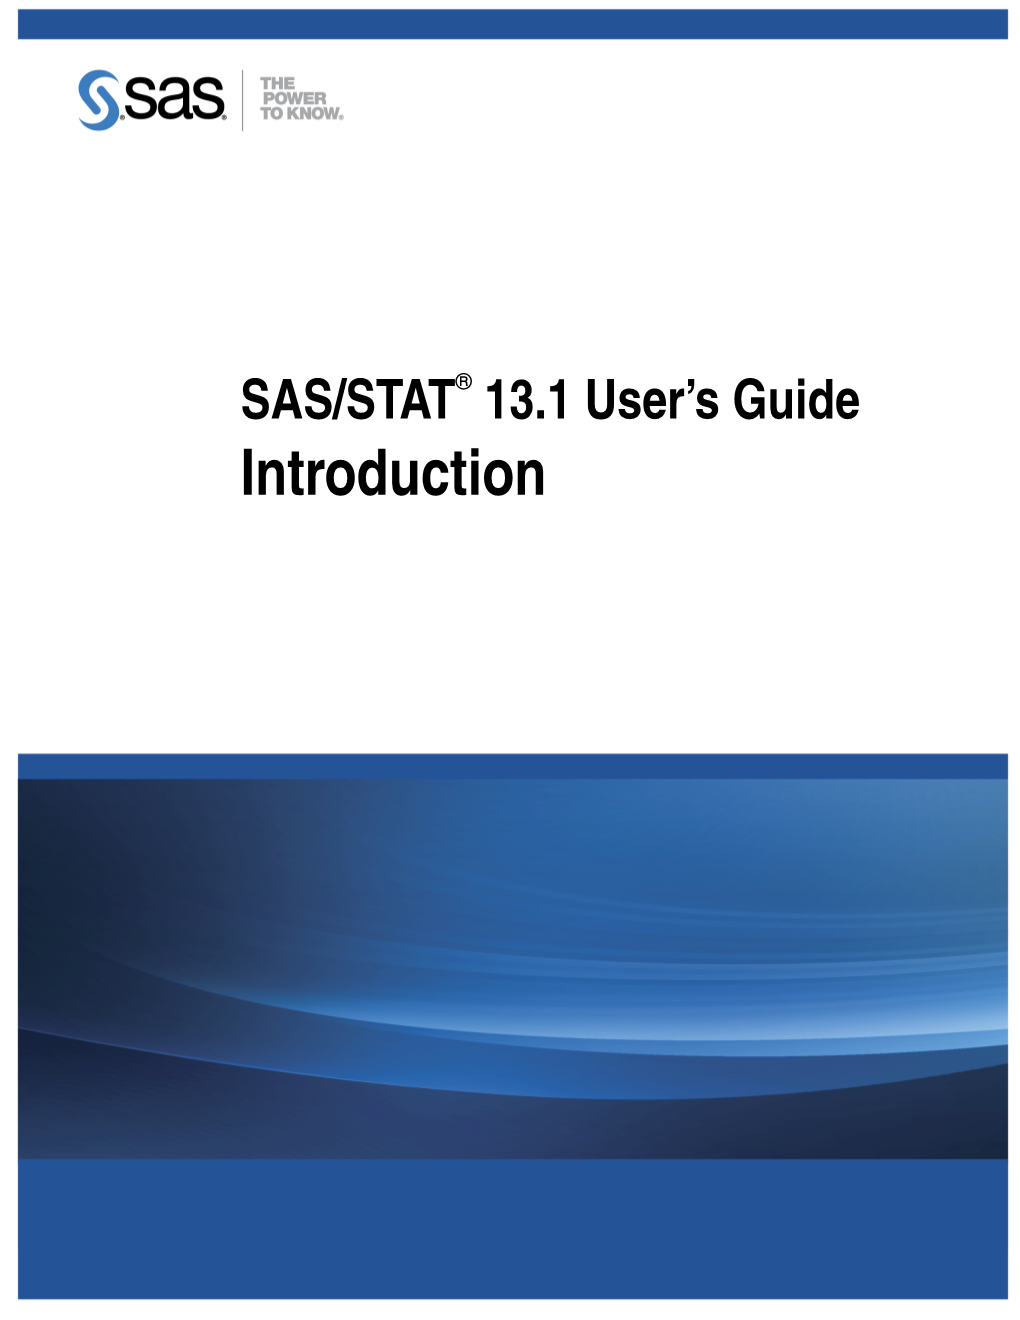 Introduction This Document Is an Individual Chapter from SAS/STAT® 13.1 User’S Guide